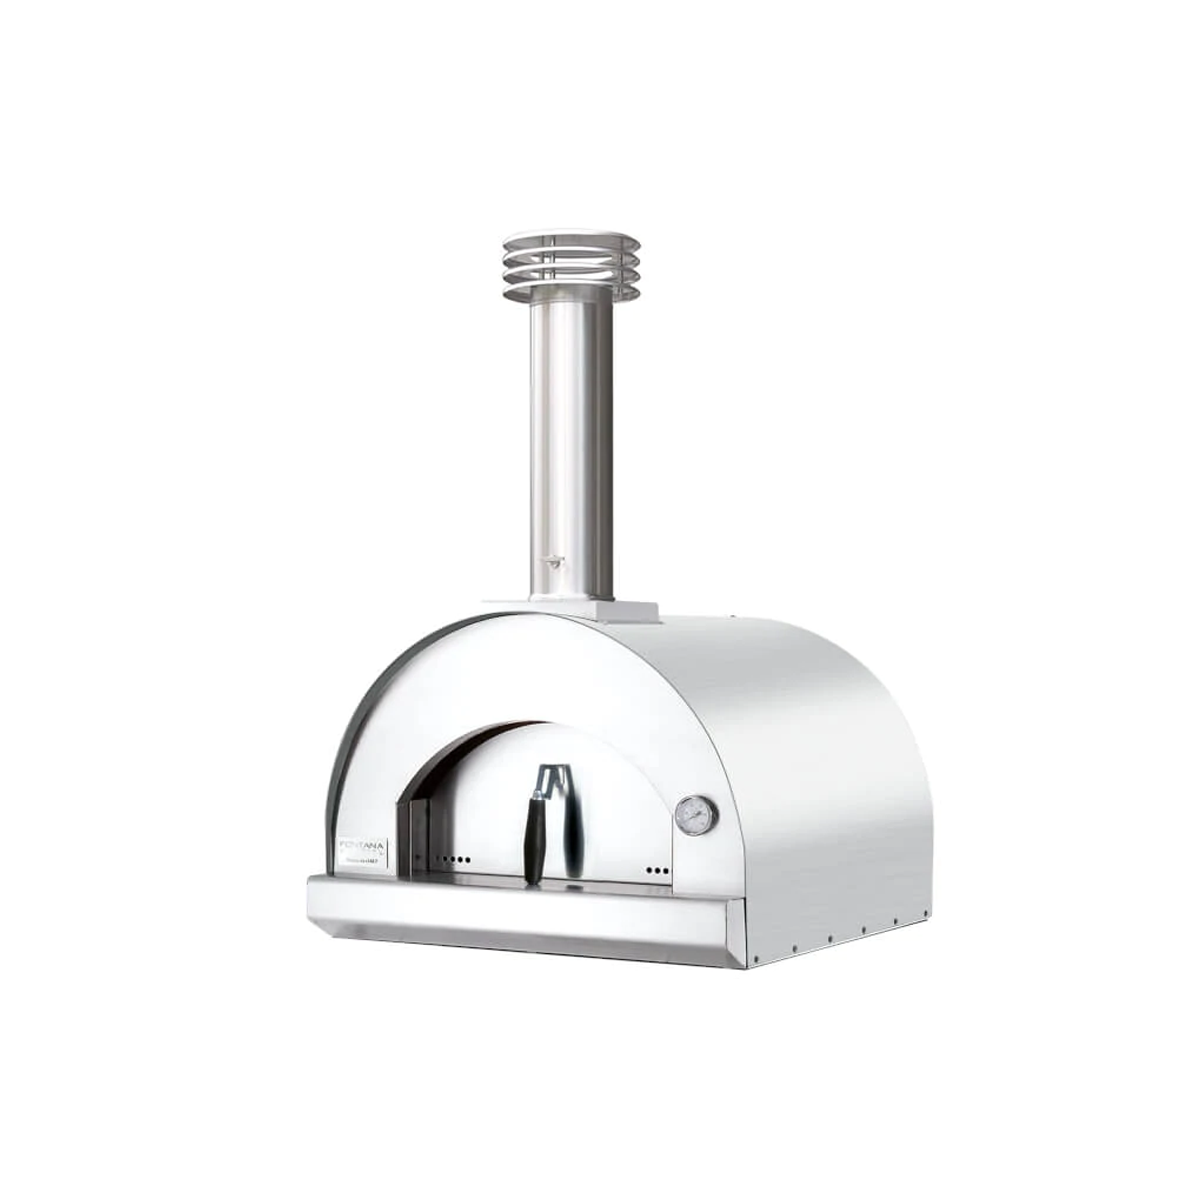 The Margherita Wood Countertop Pizza Oven